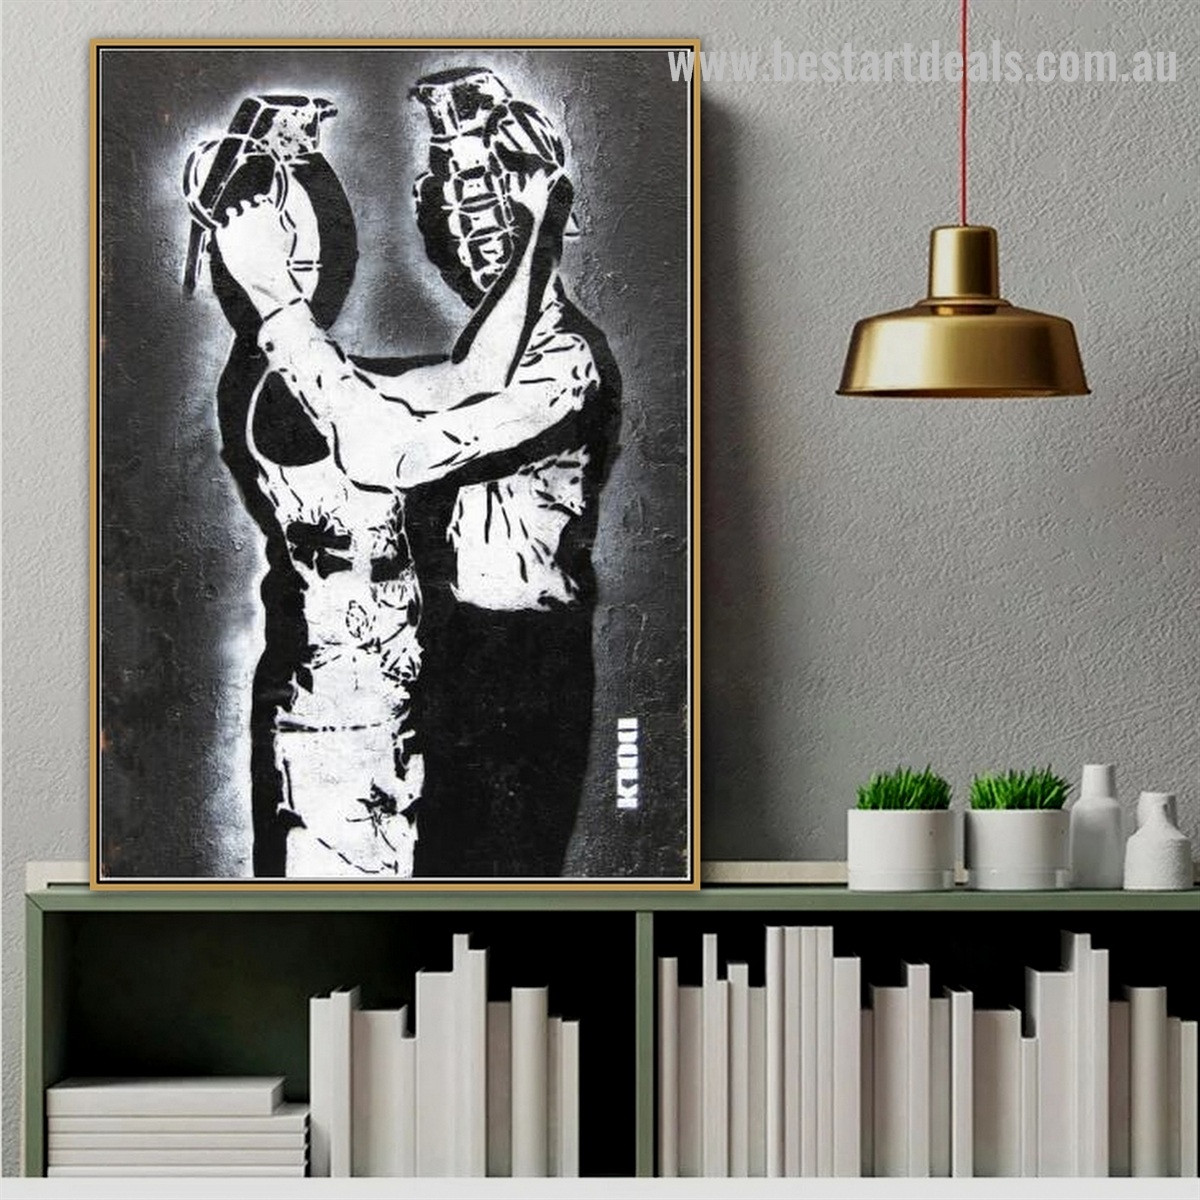 Two Human Abstract Graffiti Framed Artwork Pic Canvas Print for Room Wall Ornament